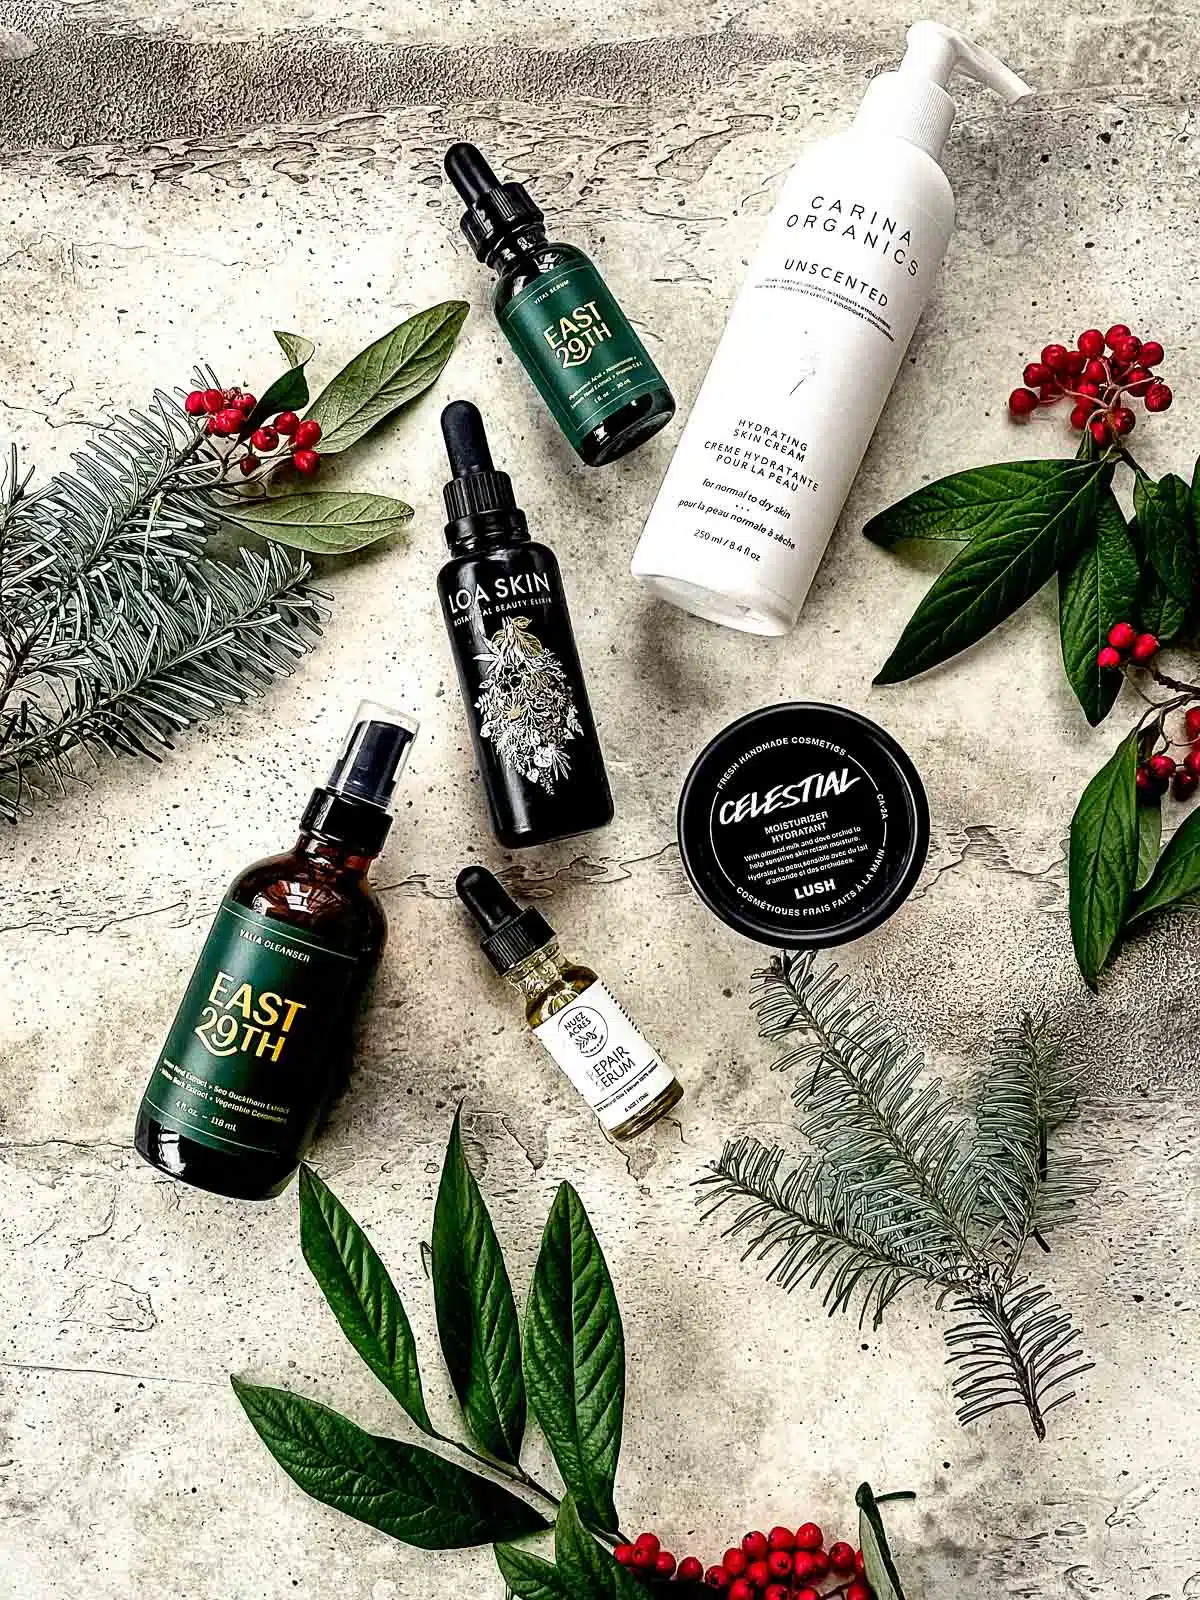 Vegan cosmetics displayed with festive leaves and berries.